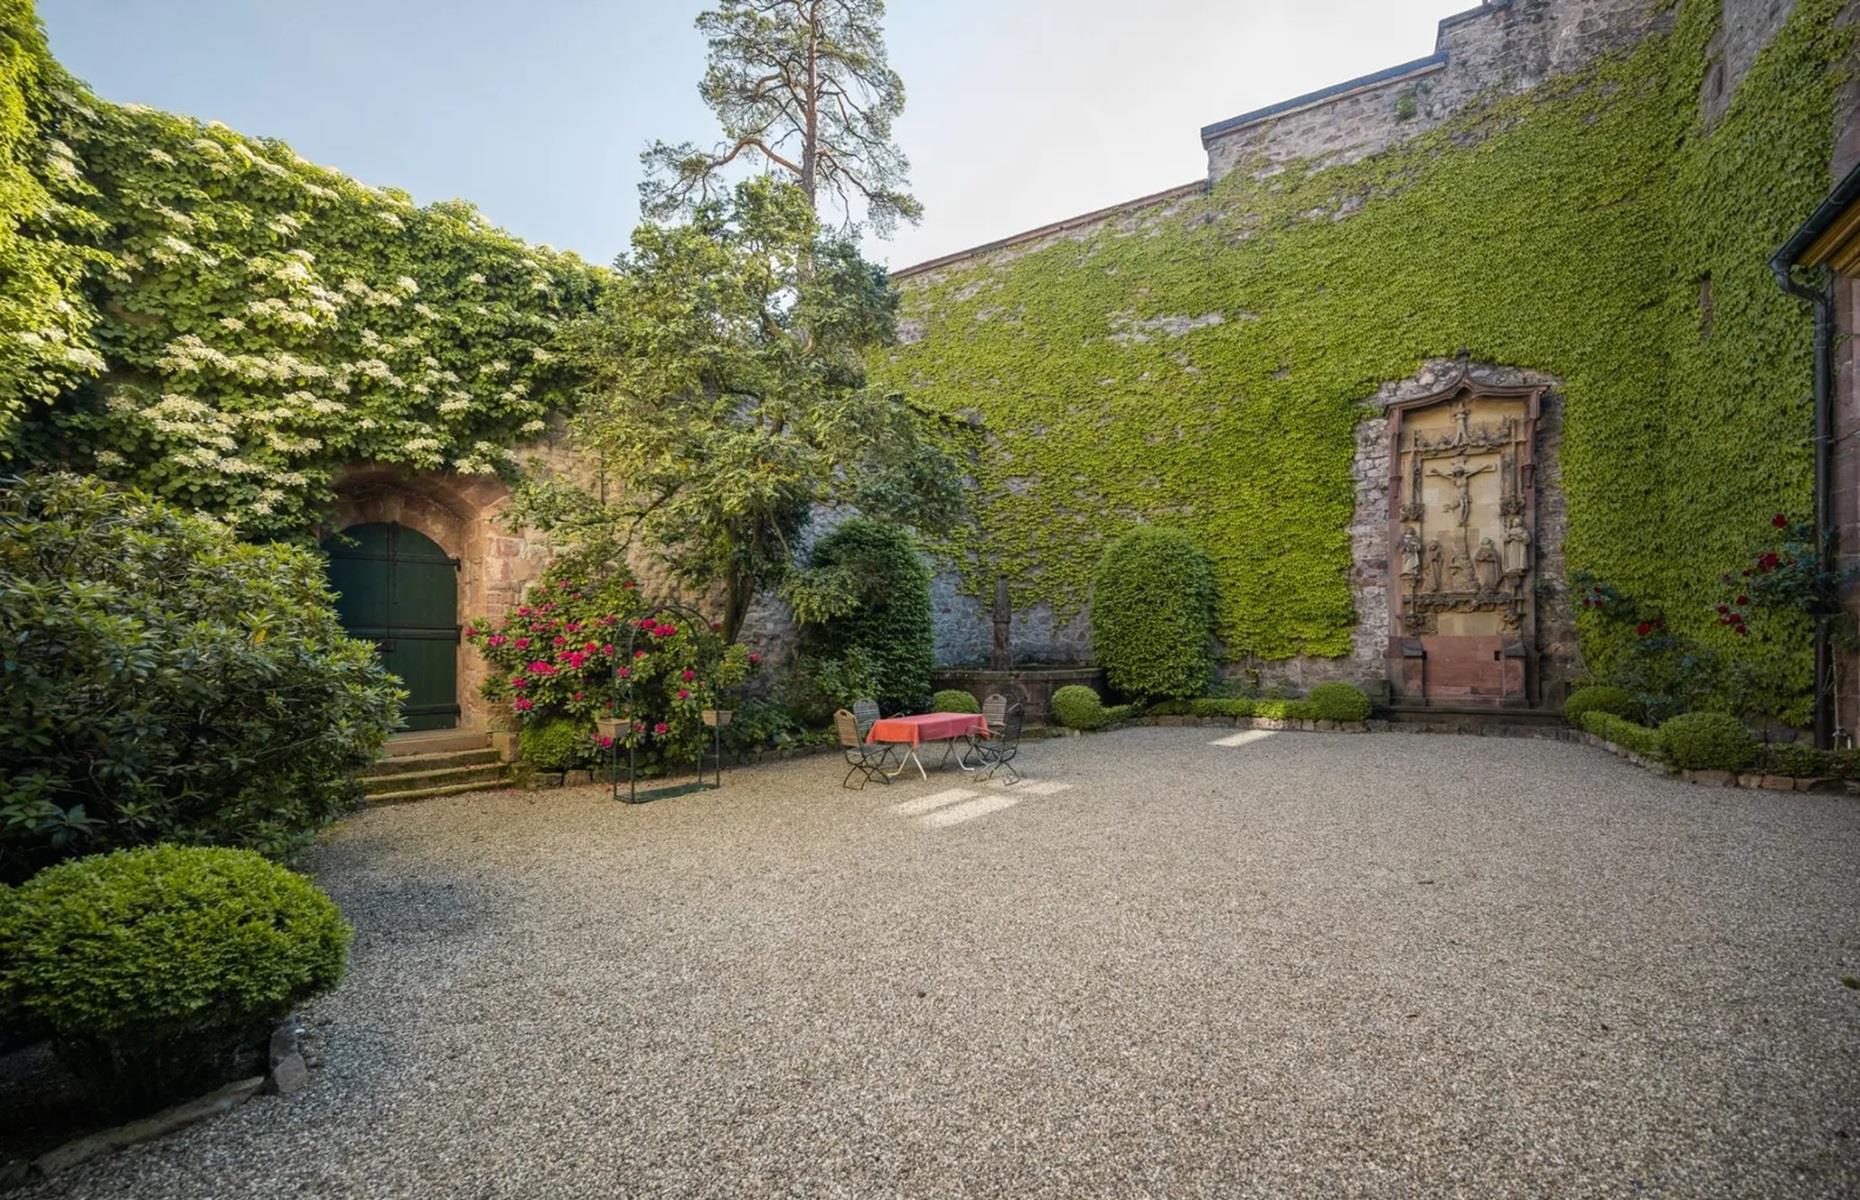 <p>Vineyards surround the castle and there's also a botanical-inspired garden and numerous stunning courtyards where we wouldn't mind whiling away the hours.</p>  <p><a href="https://www.sothebysrealty.com/eng/sales/detail/180-l-2813395-v9c74q/eberstein-castle-the-landmark-of-the-murg-valley-gernsbach-bw-76593">For sale</a> with Baden-Württemberg Sotheby's International Realty in May 2024, for an undisclosed sum, we're sure this grand stately home could be described as priceless!</p>